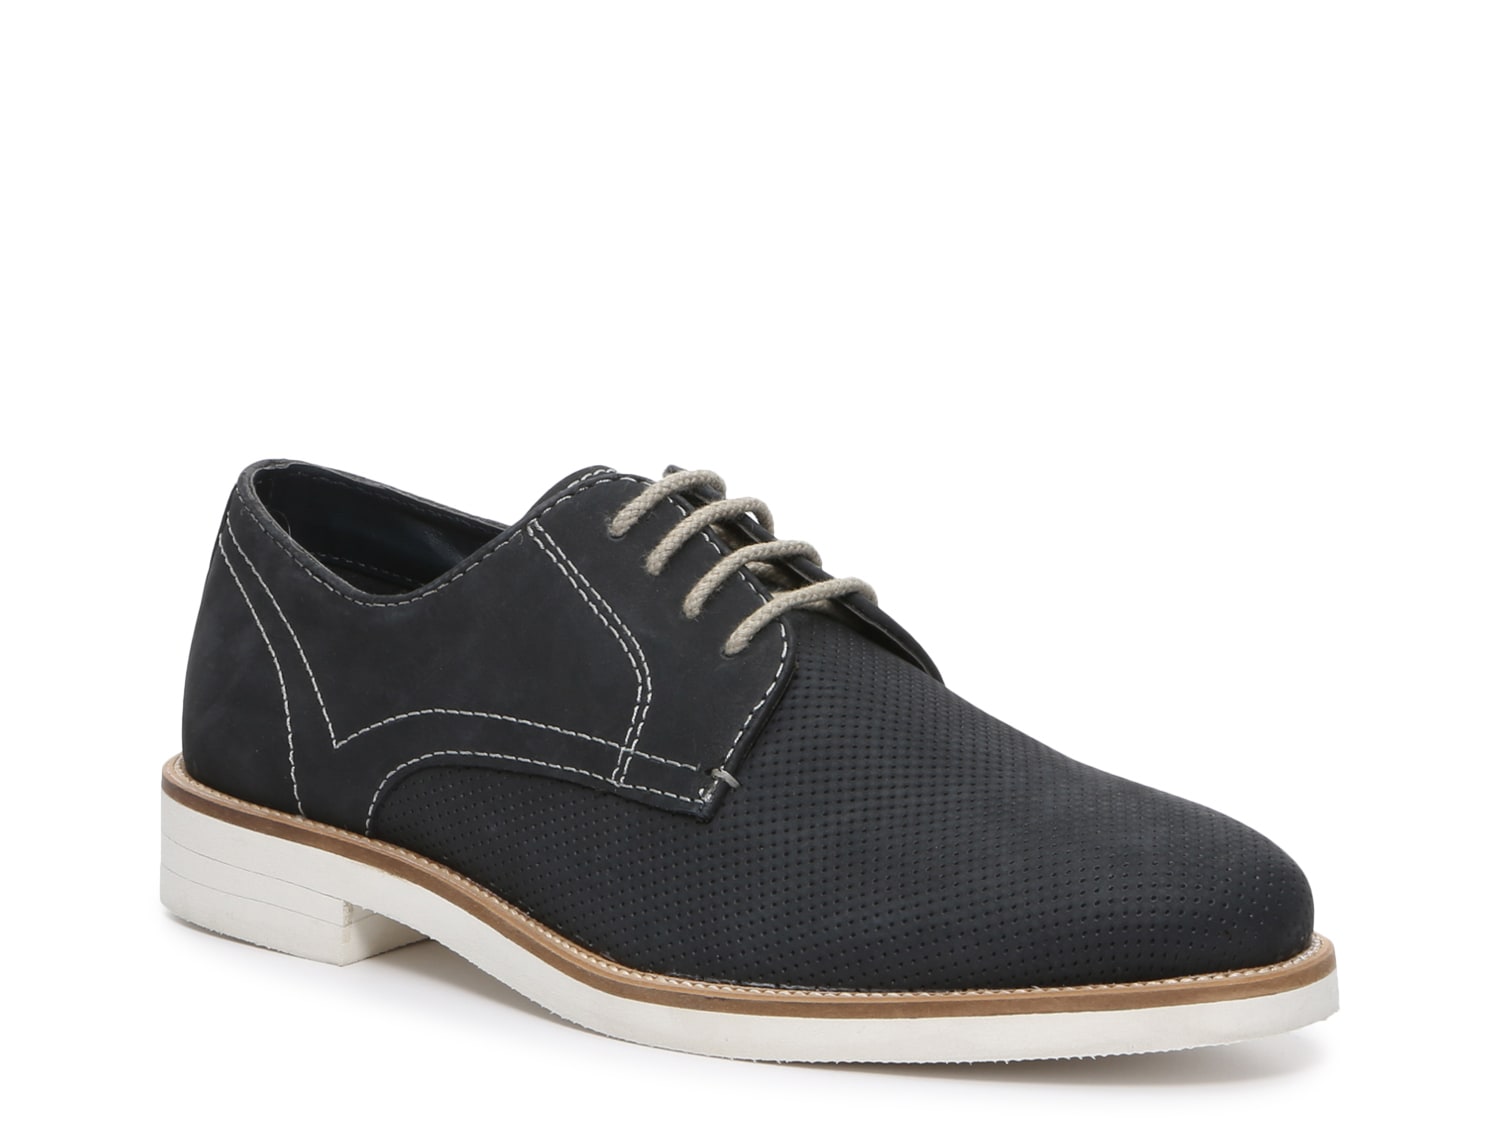 Crown Vintage Crowly Oxford - Free Shipping | DSW